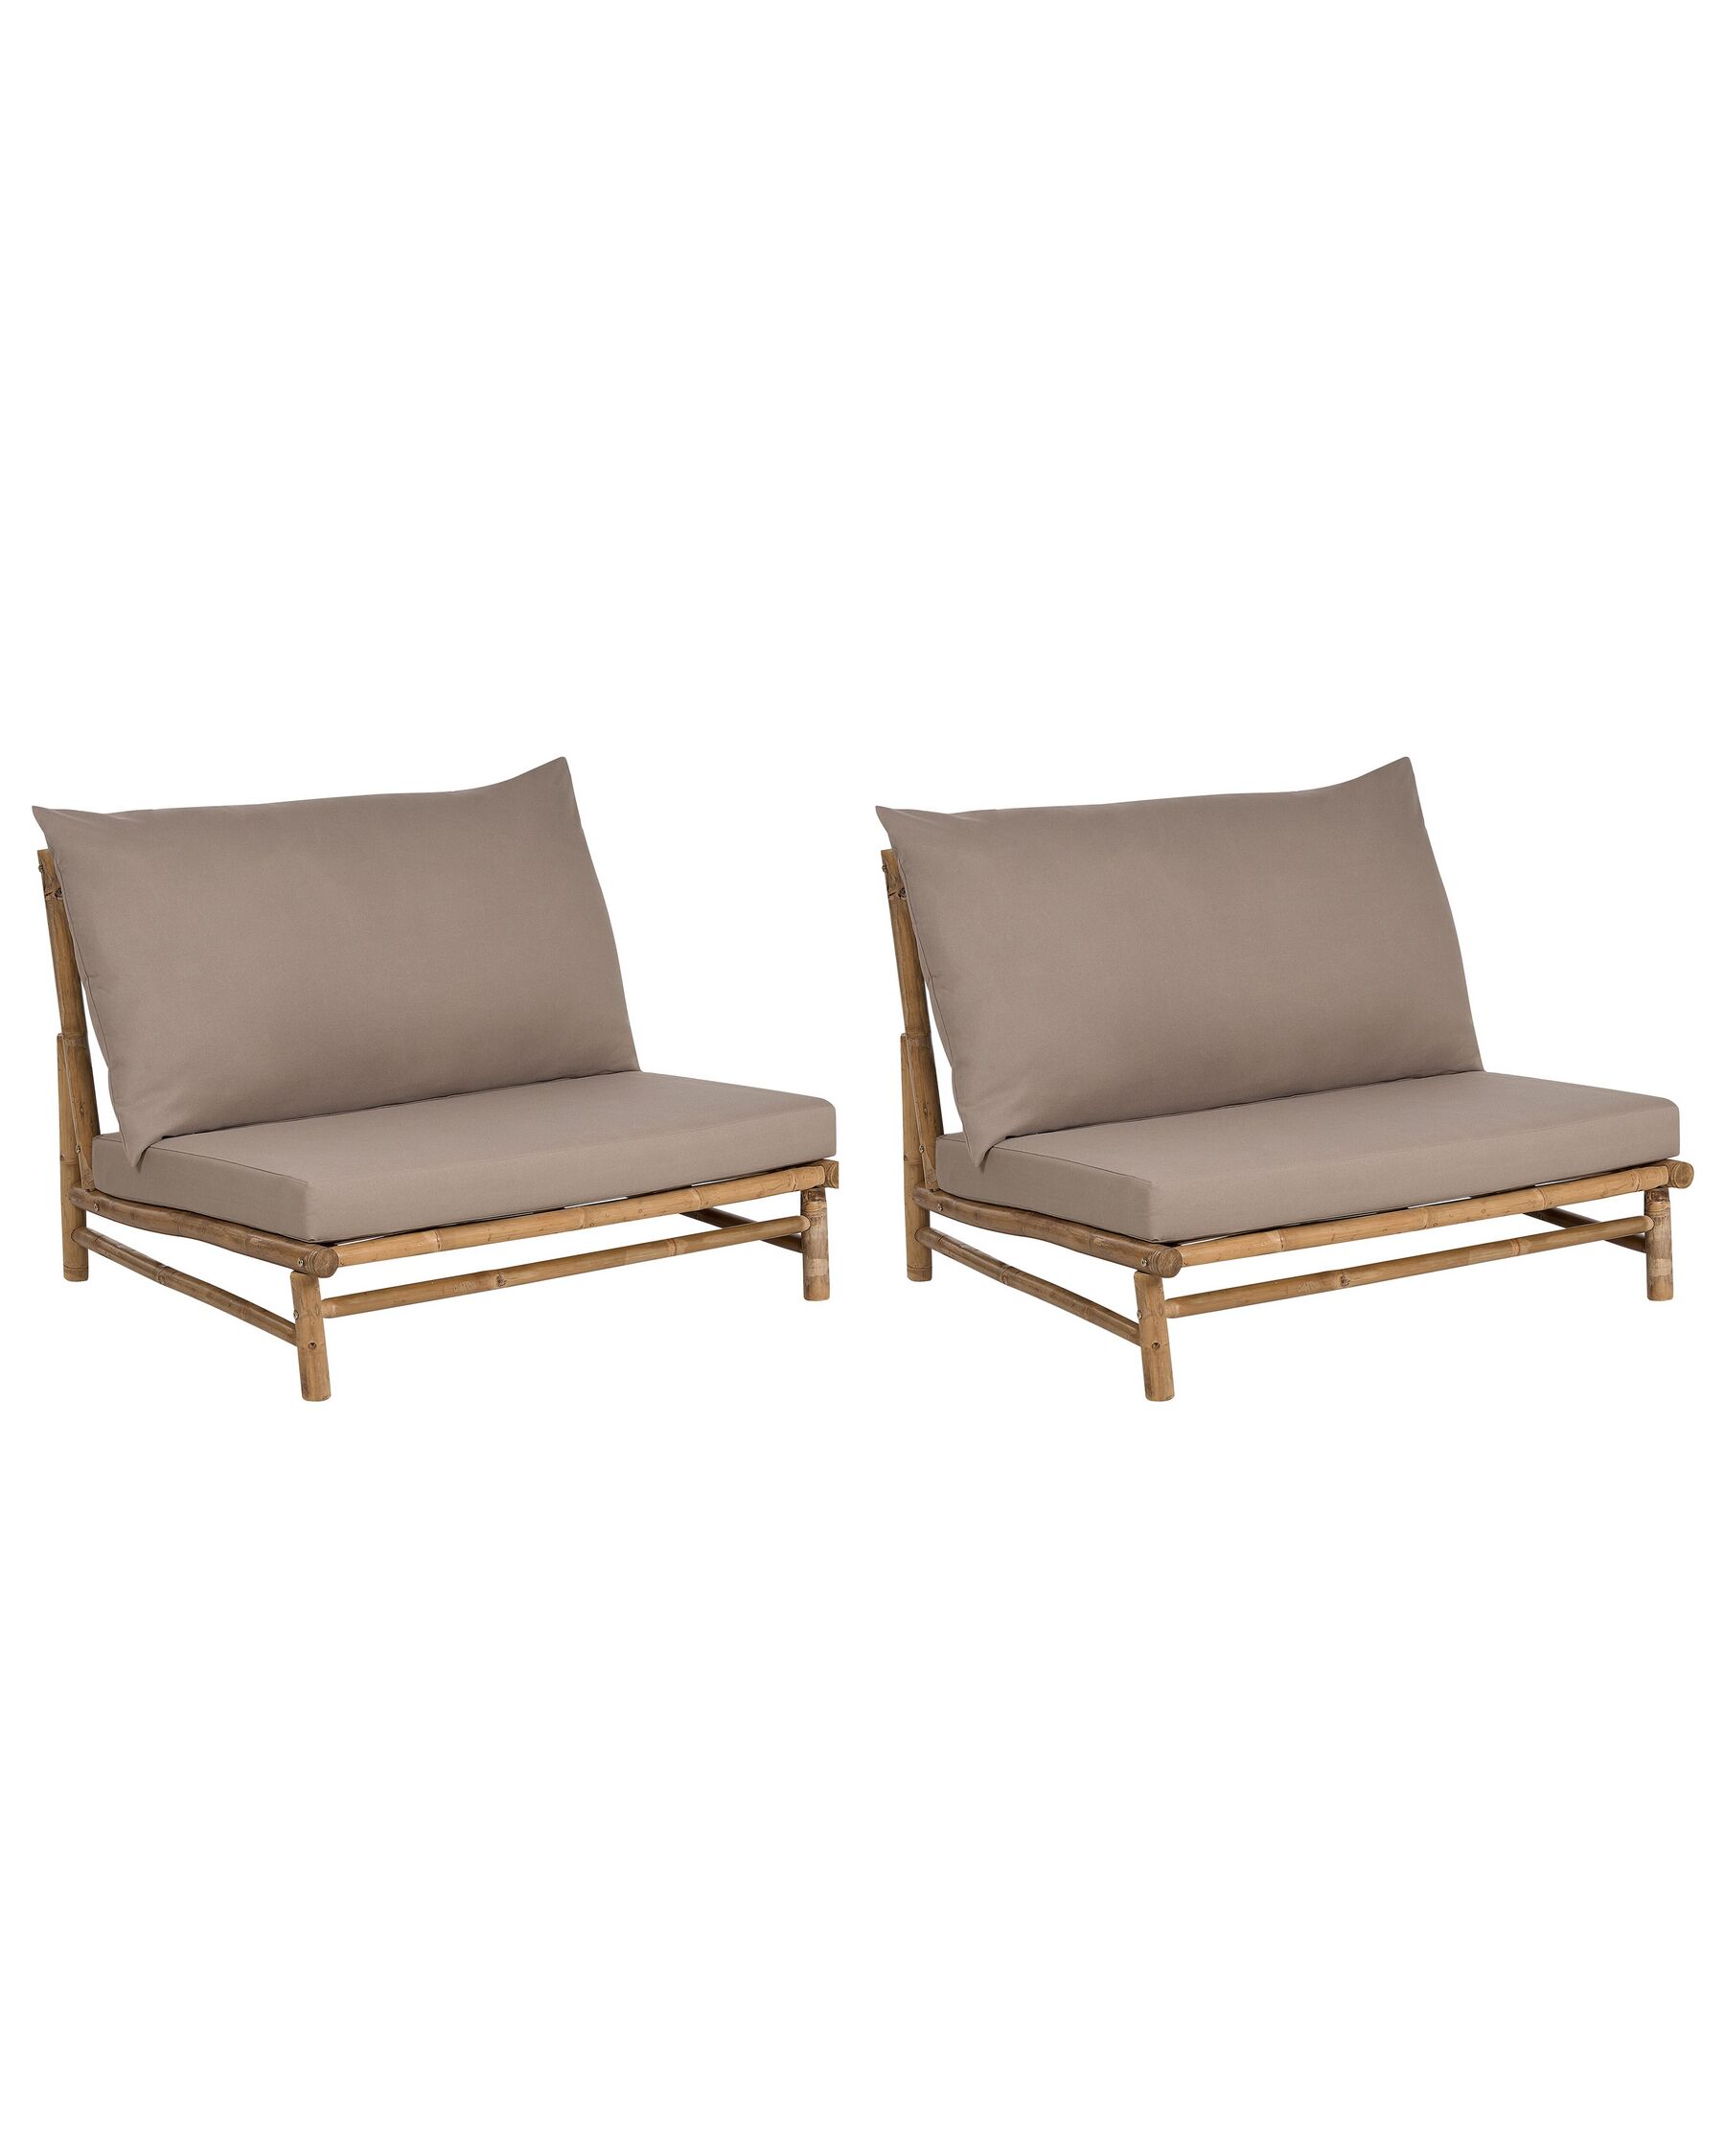 Set of 2 Bamboo Chairs Light Wood and Taupe TODI_872735